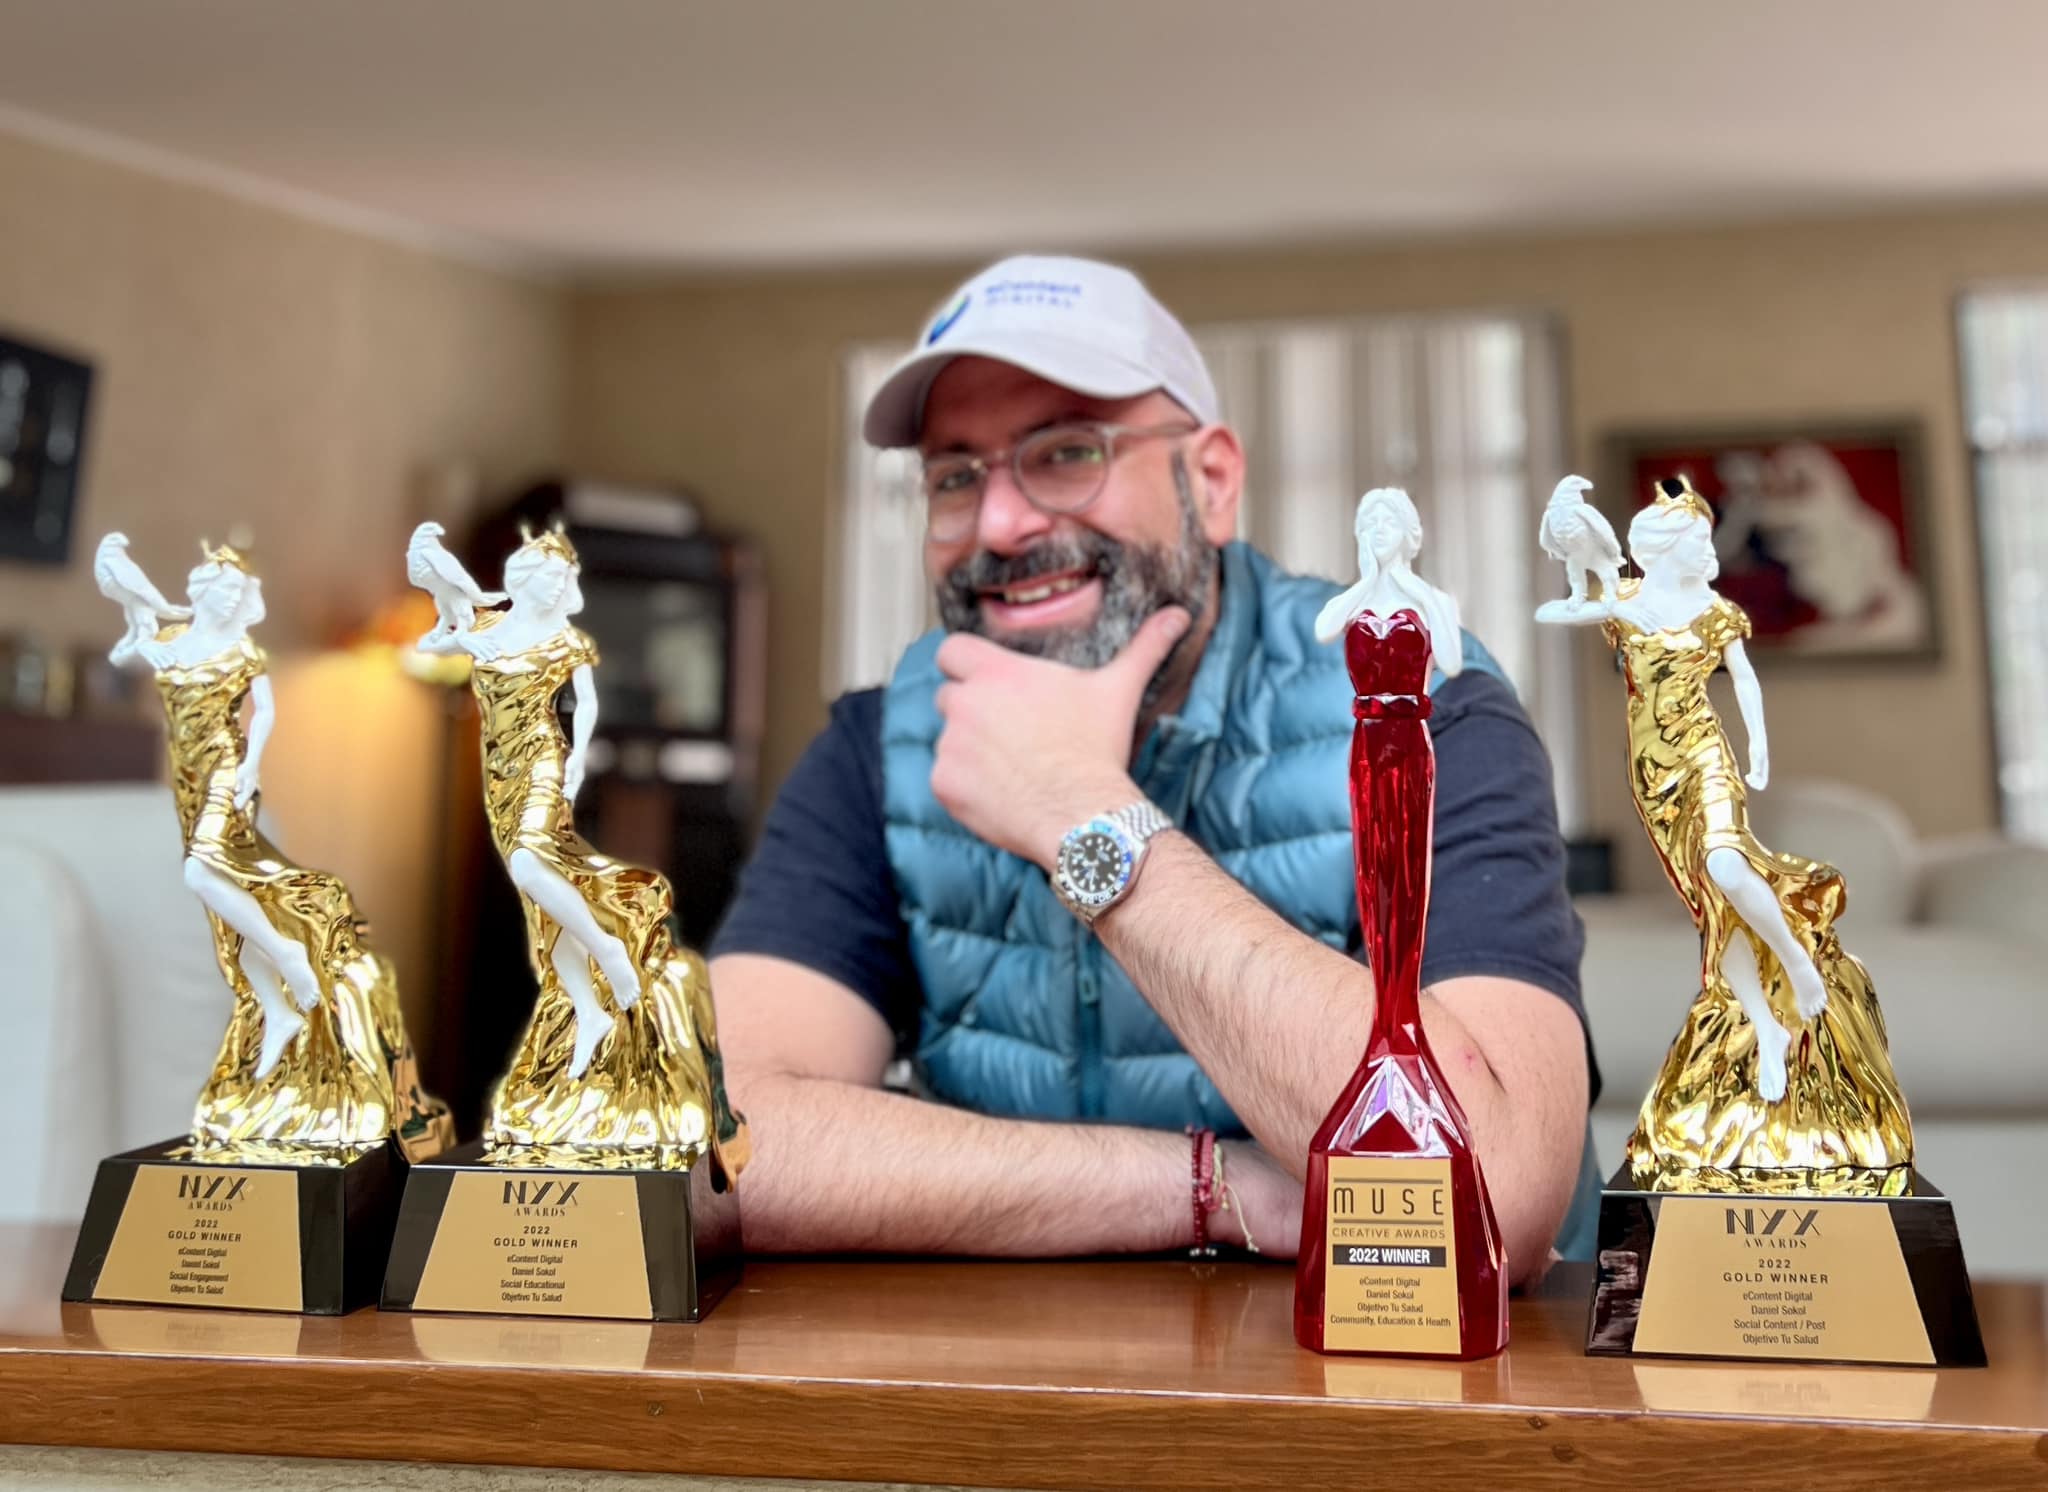 Stoked to finally be able to hold these amazing MUSE statuettes! - MUSE Winner Gallery